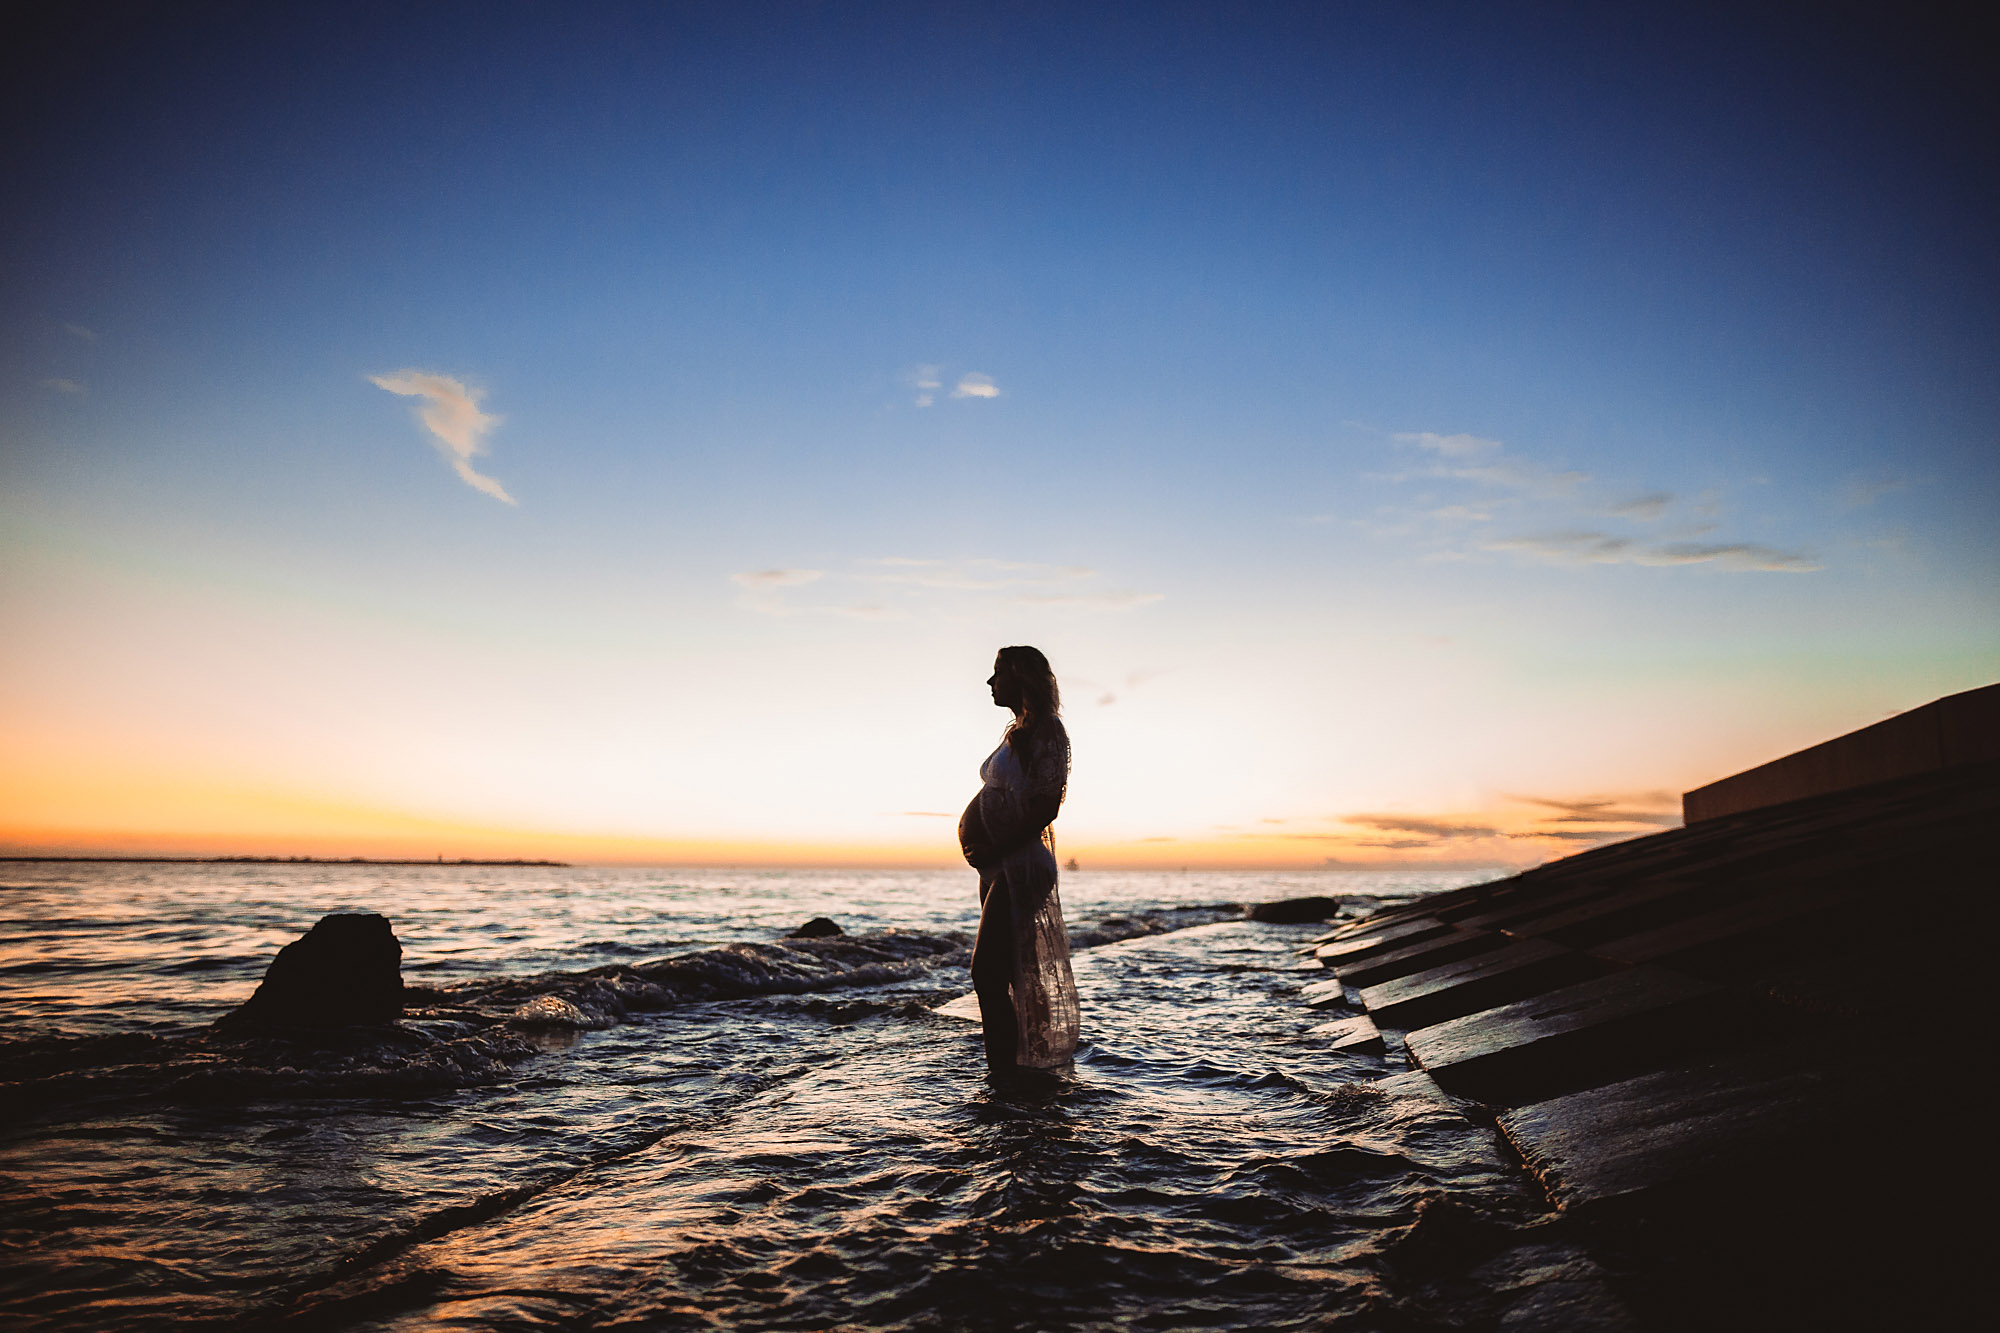 epic sunset maternity photo's, professional maternity photographer in st Pete fl 